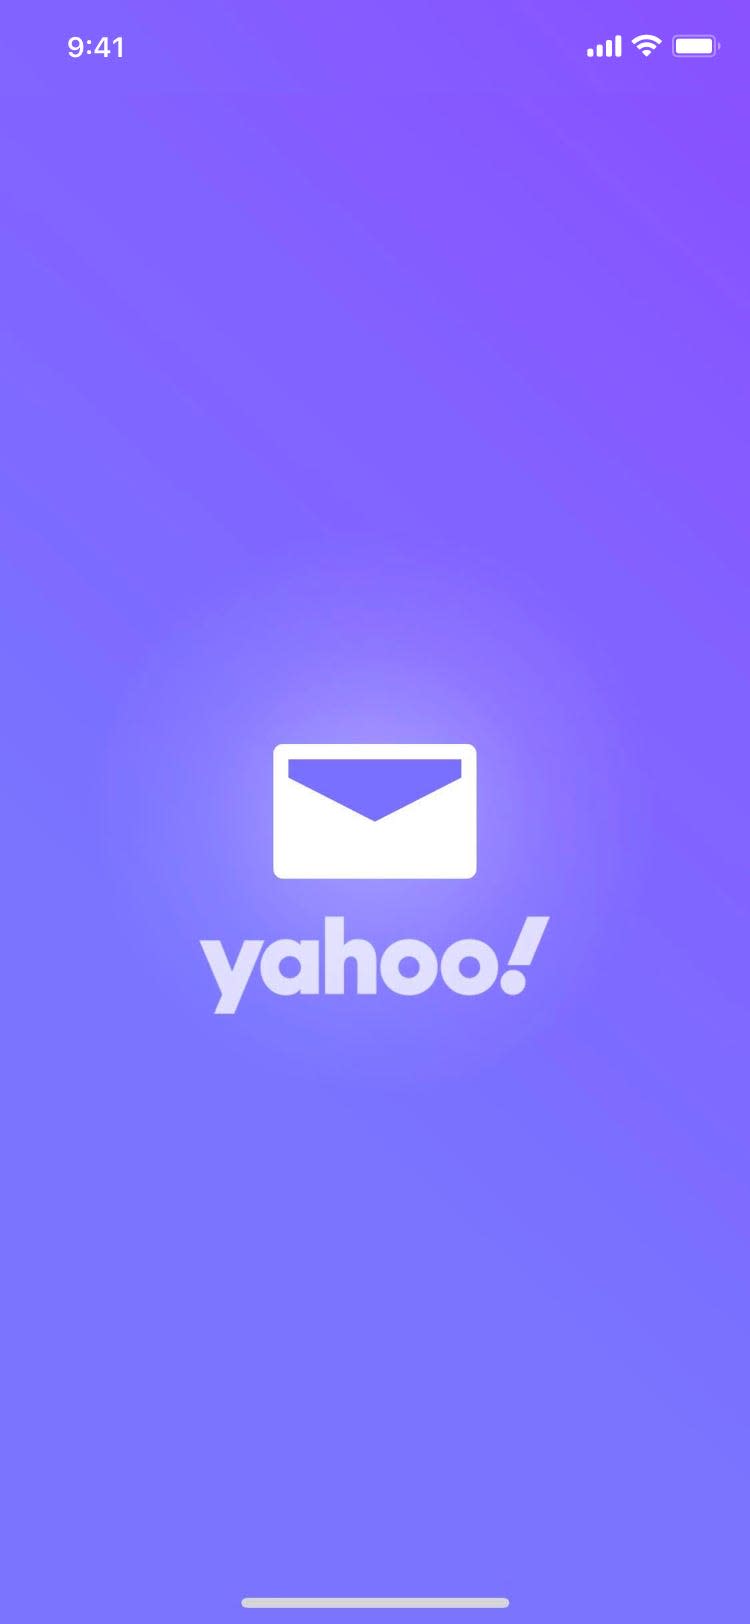 Yahoo and Walmart want you to shop from your email inbox.